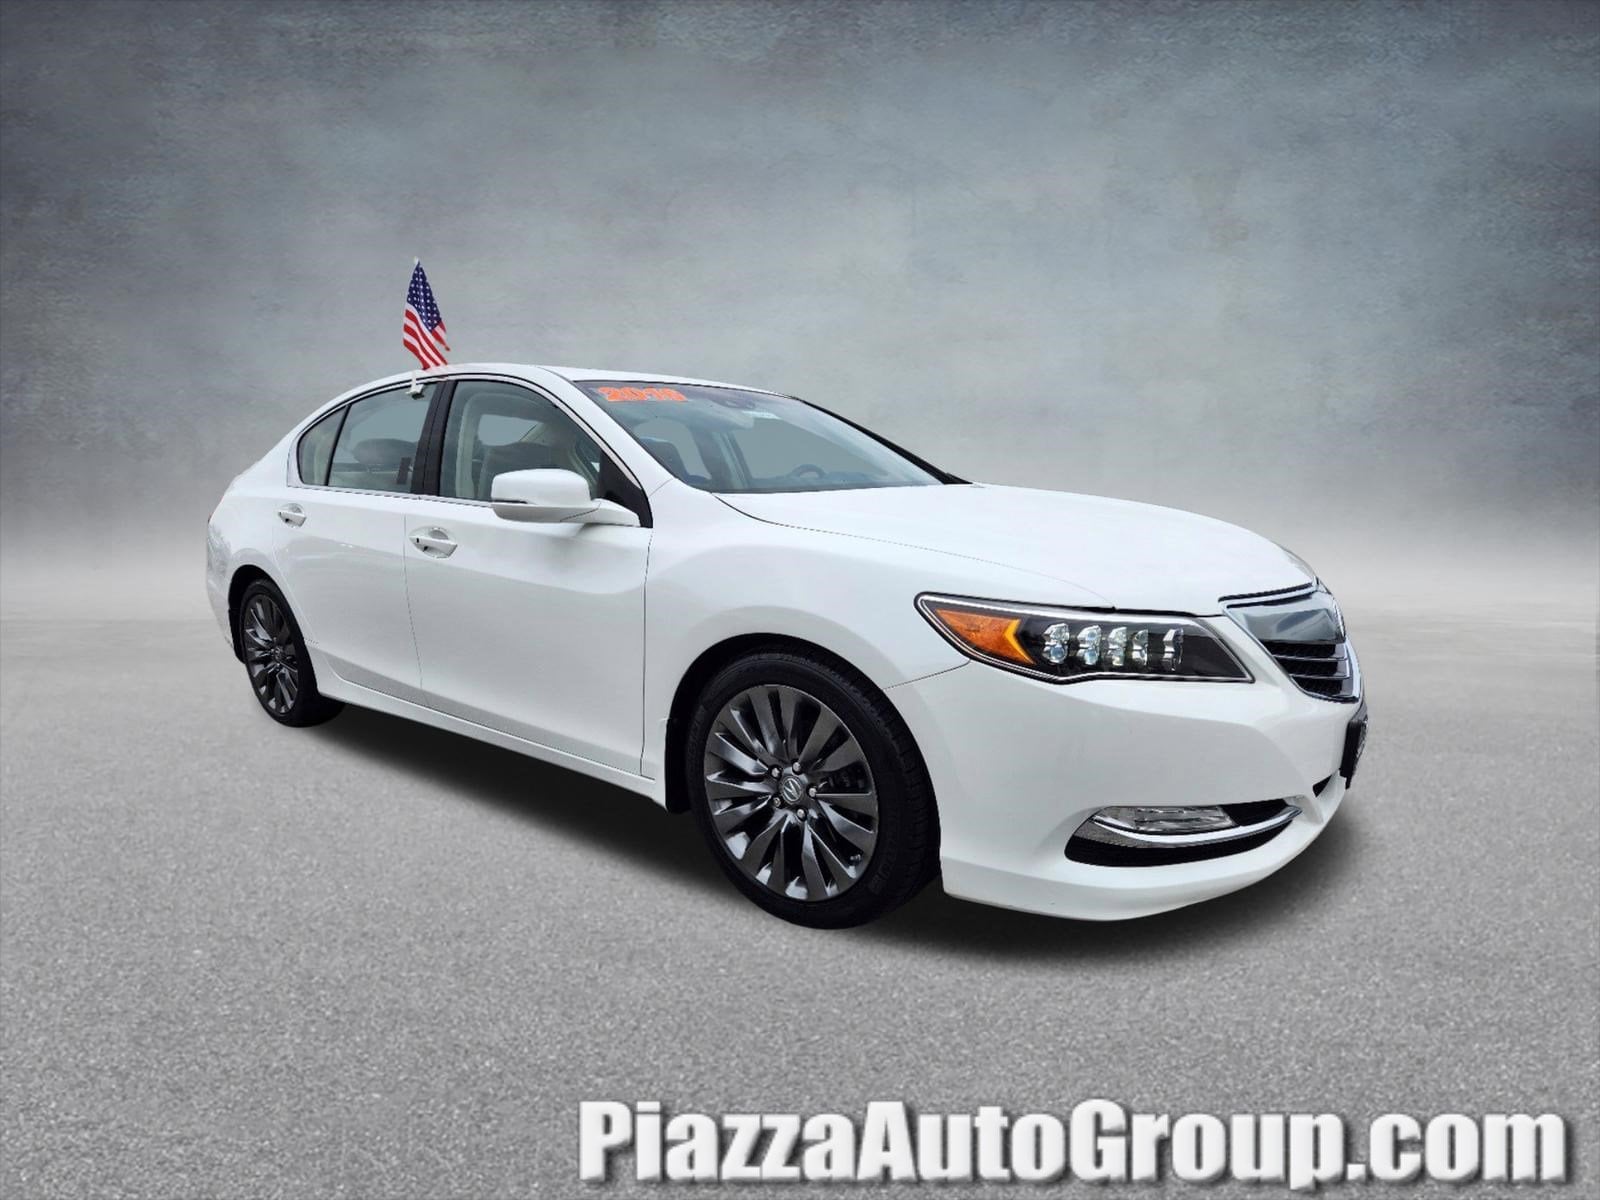 Used 2016 Acura RLX For Sale in Limerick, PA | VIN# JH4KC1F5XGC001012